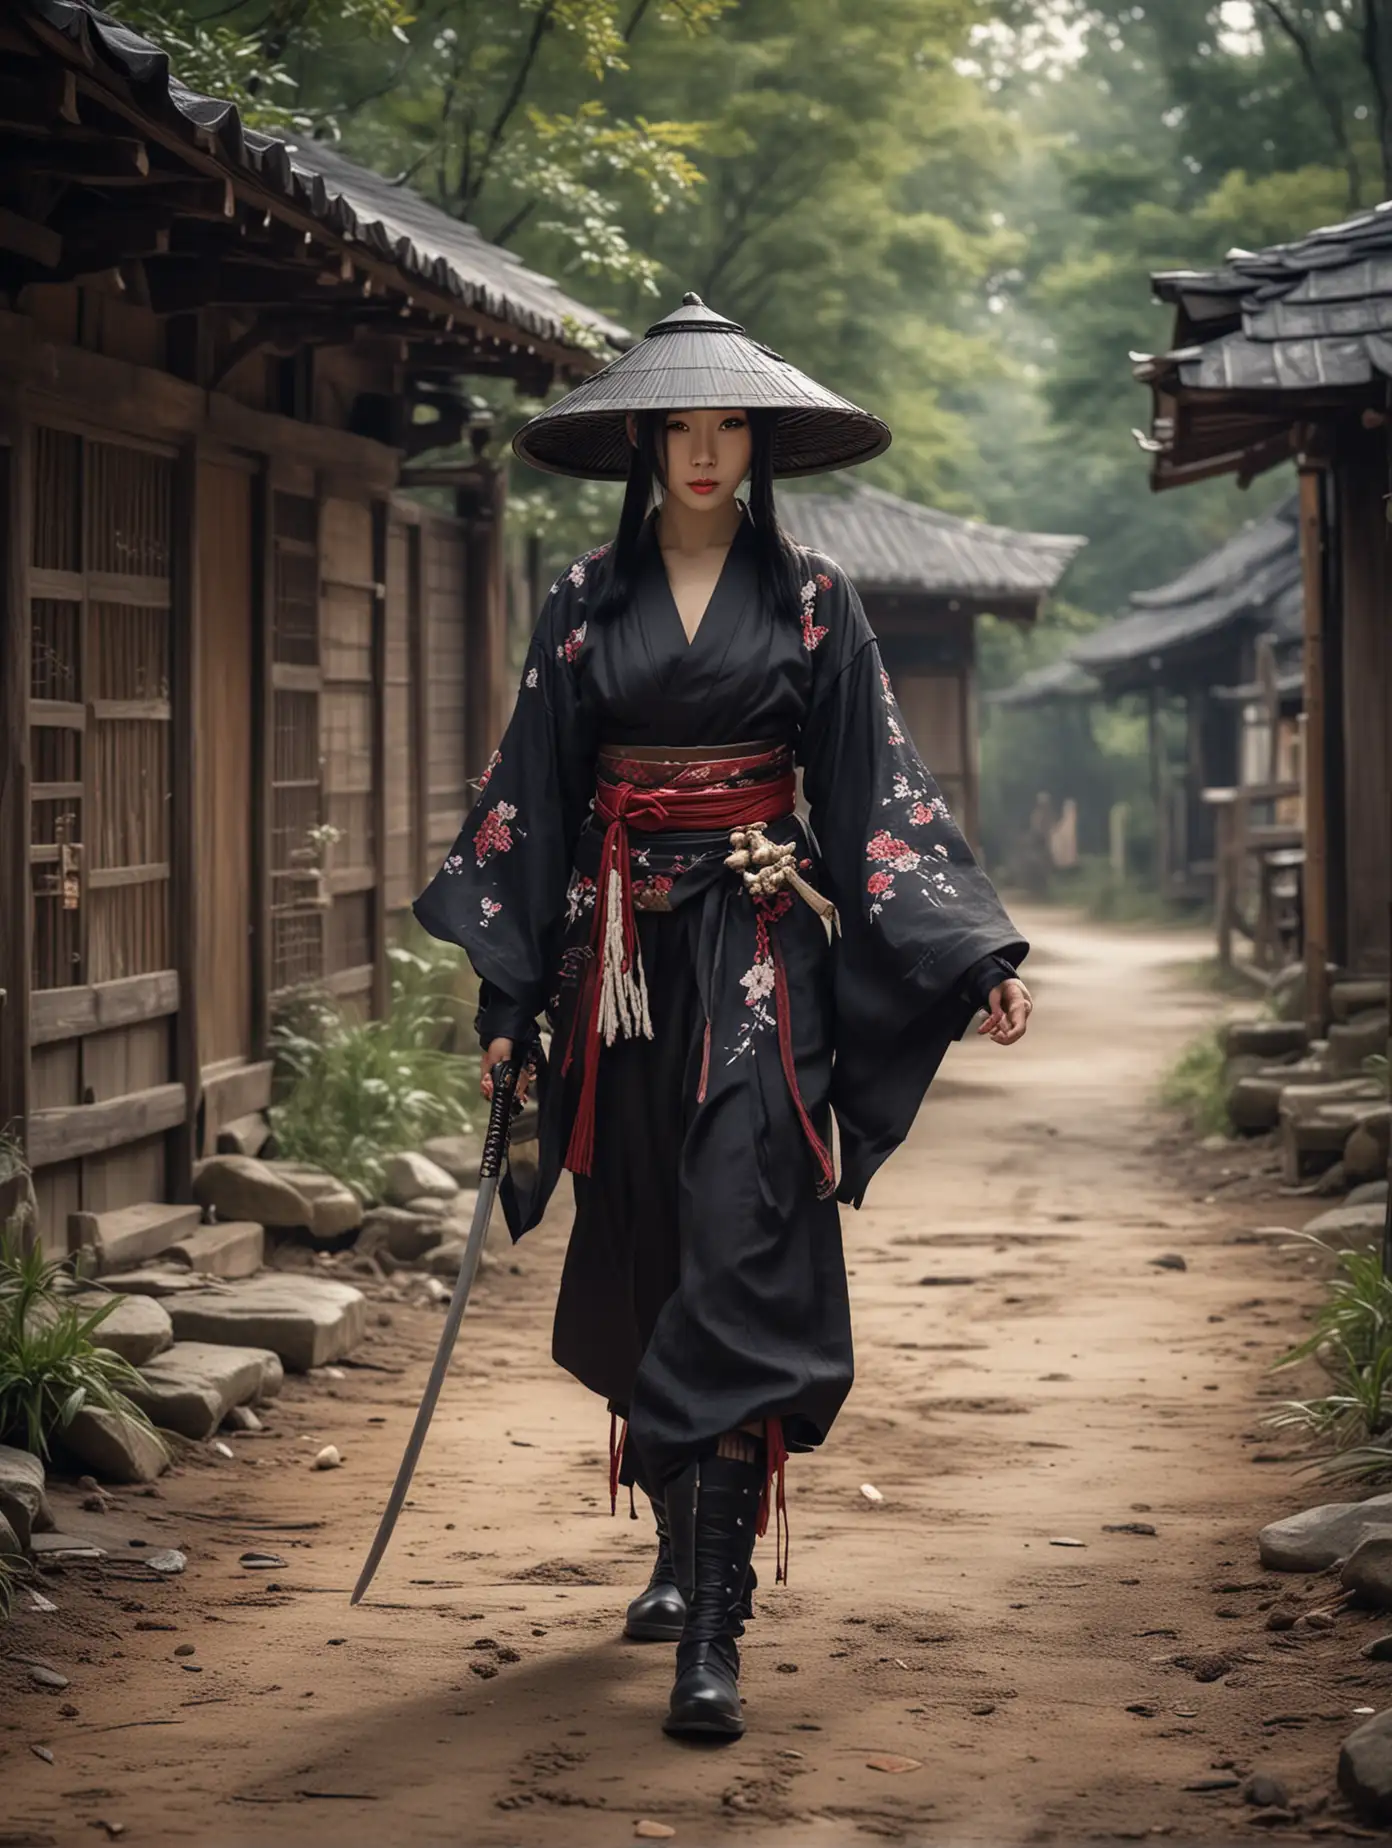 Ethereal-Fantasy-Art-American-Woman-Cosplay-as-Hayabusa-with-Katana-in-Medieval-Japanese-Cottage